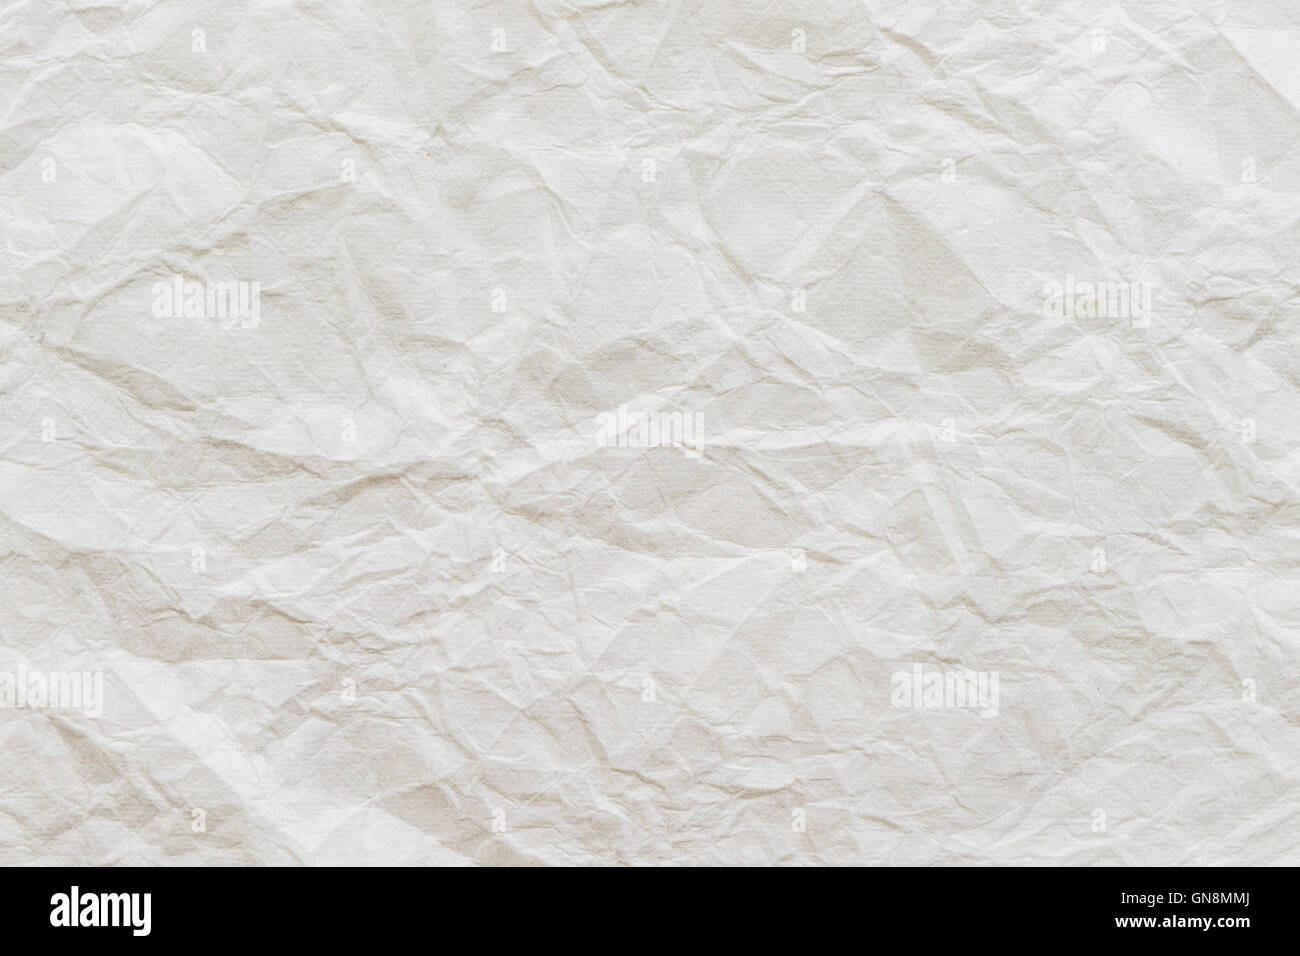 crumpled paper texture background Stock Photo